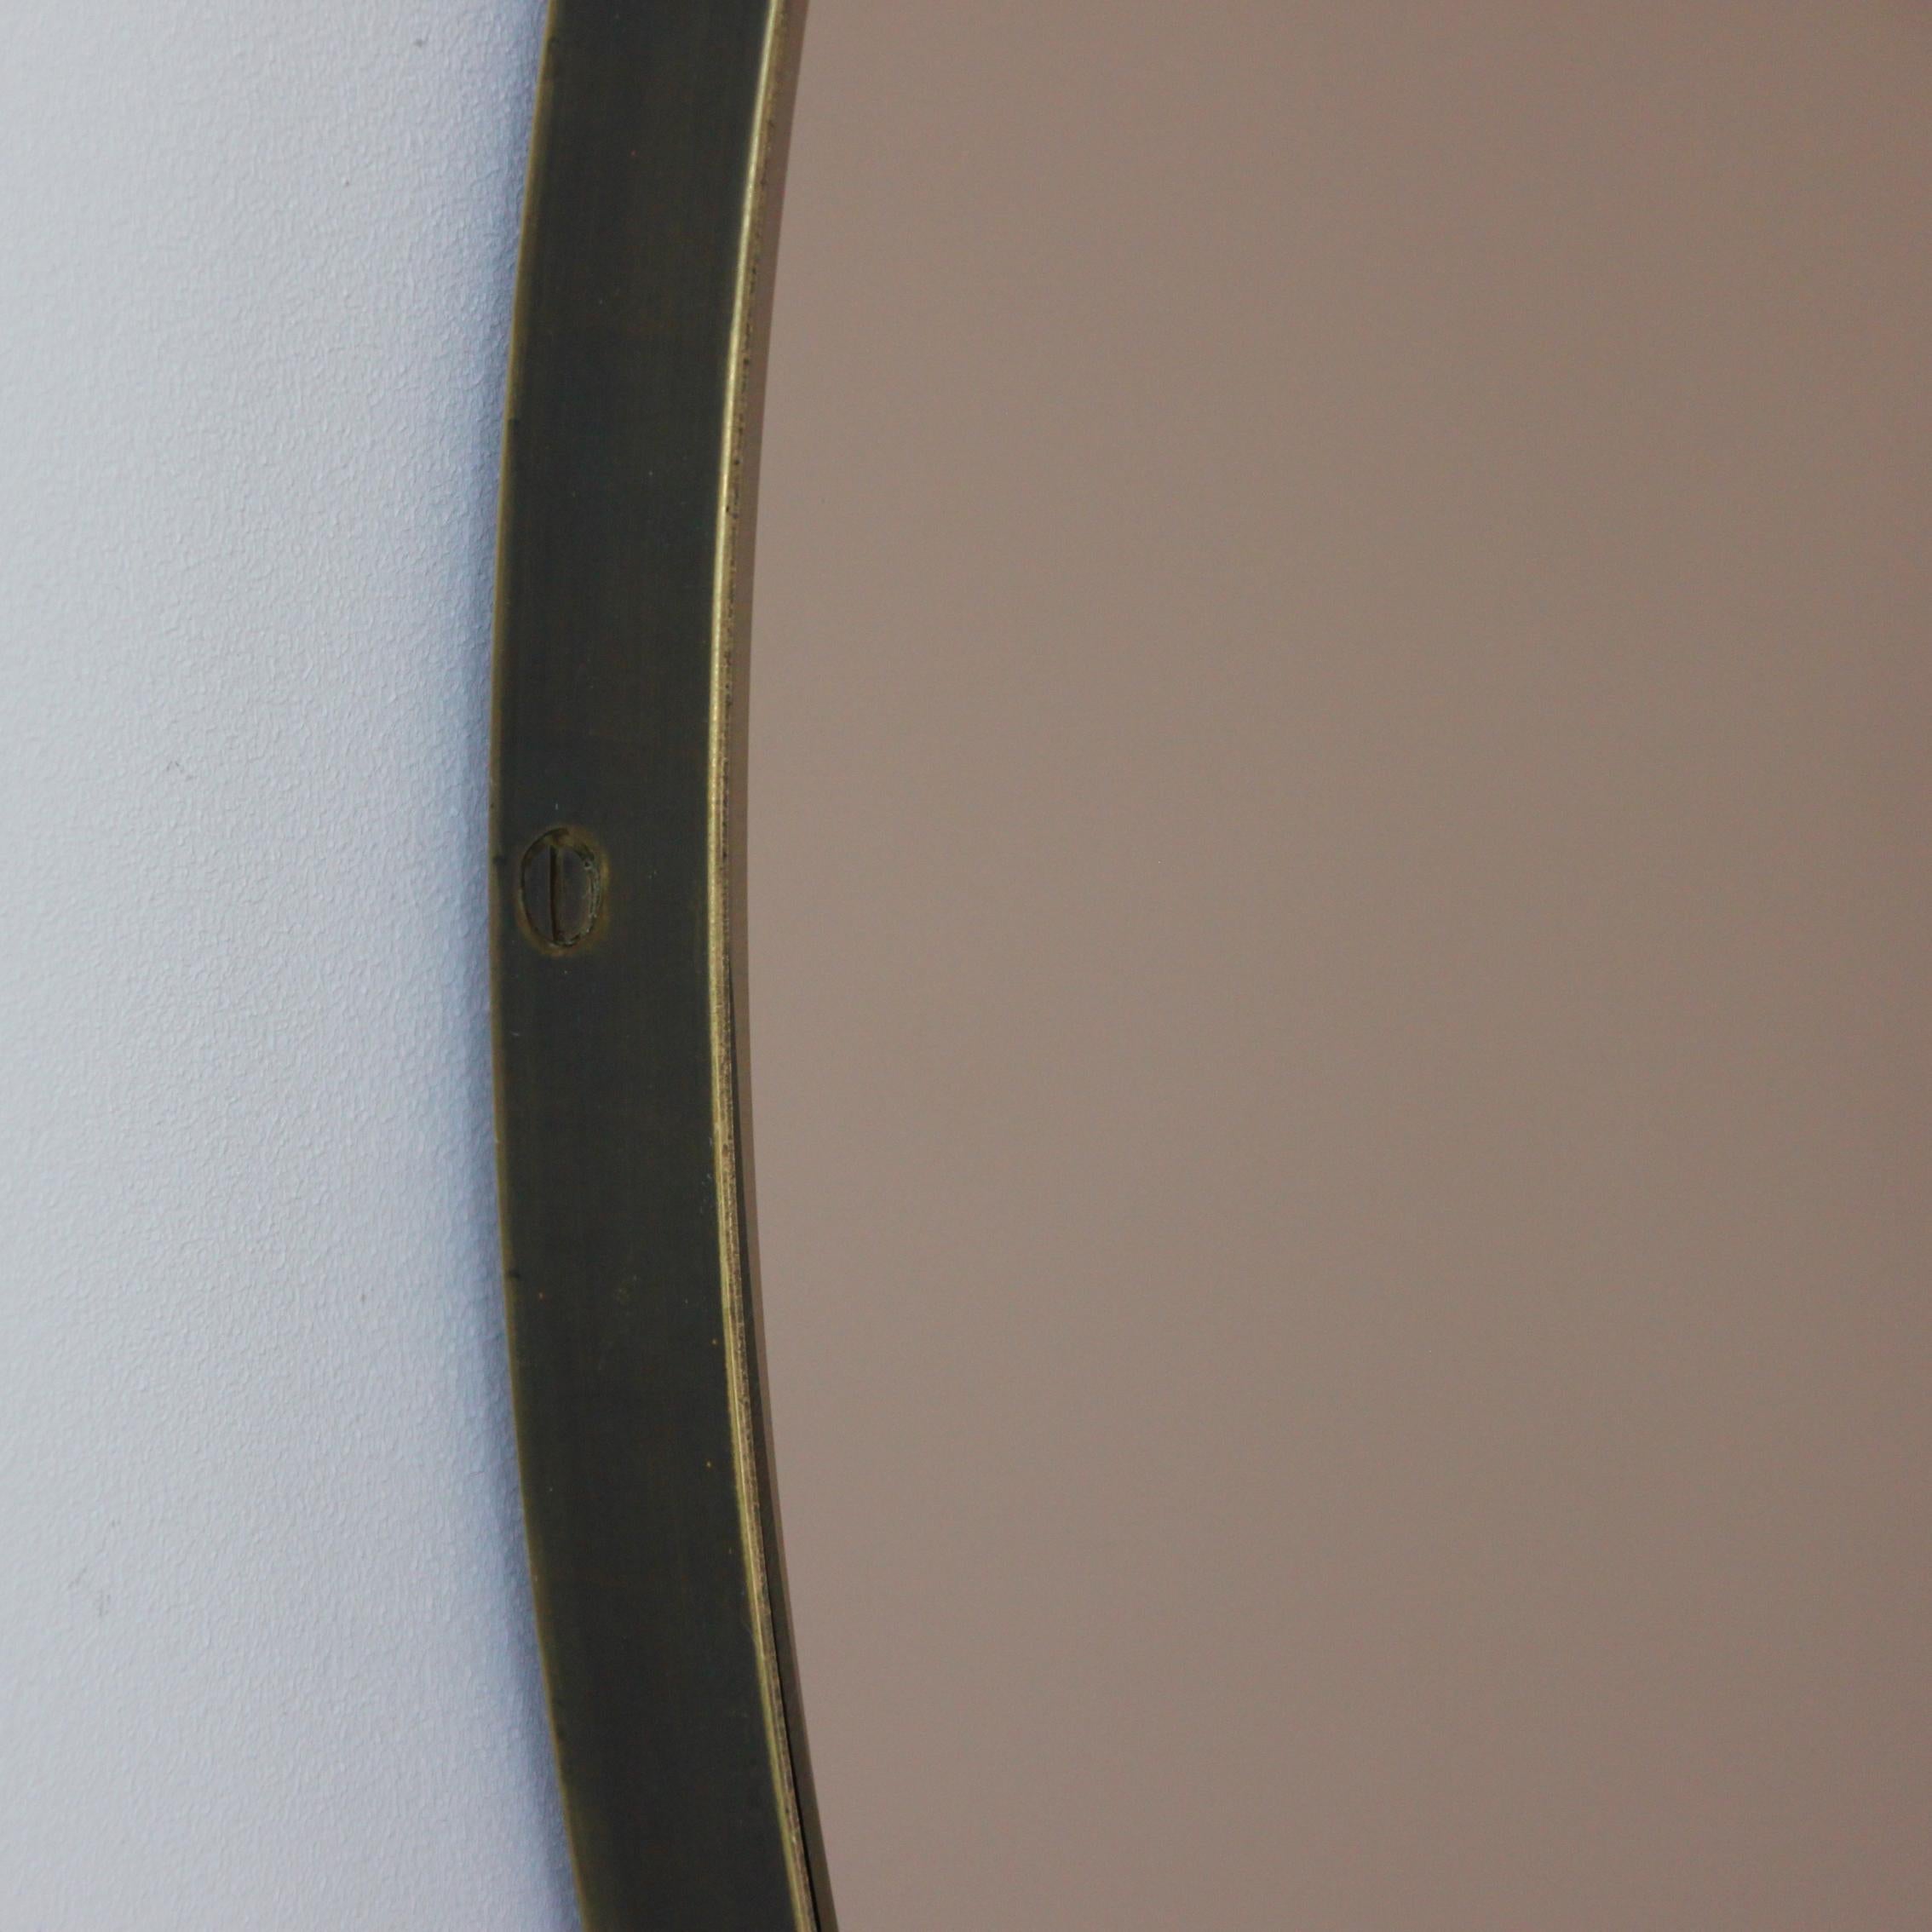 Contemporary bronze tinted Orbis™ round mirror with a solid brass frame with a bronze patina finish. Designed and handcrafted in London, UK.

Our mirrors are designed with an integrated French cleat (split batten) system that ensures the mirror is